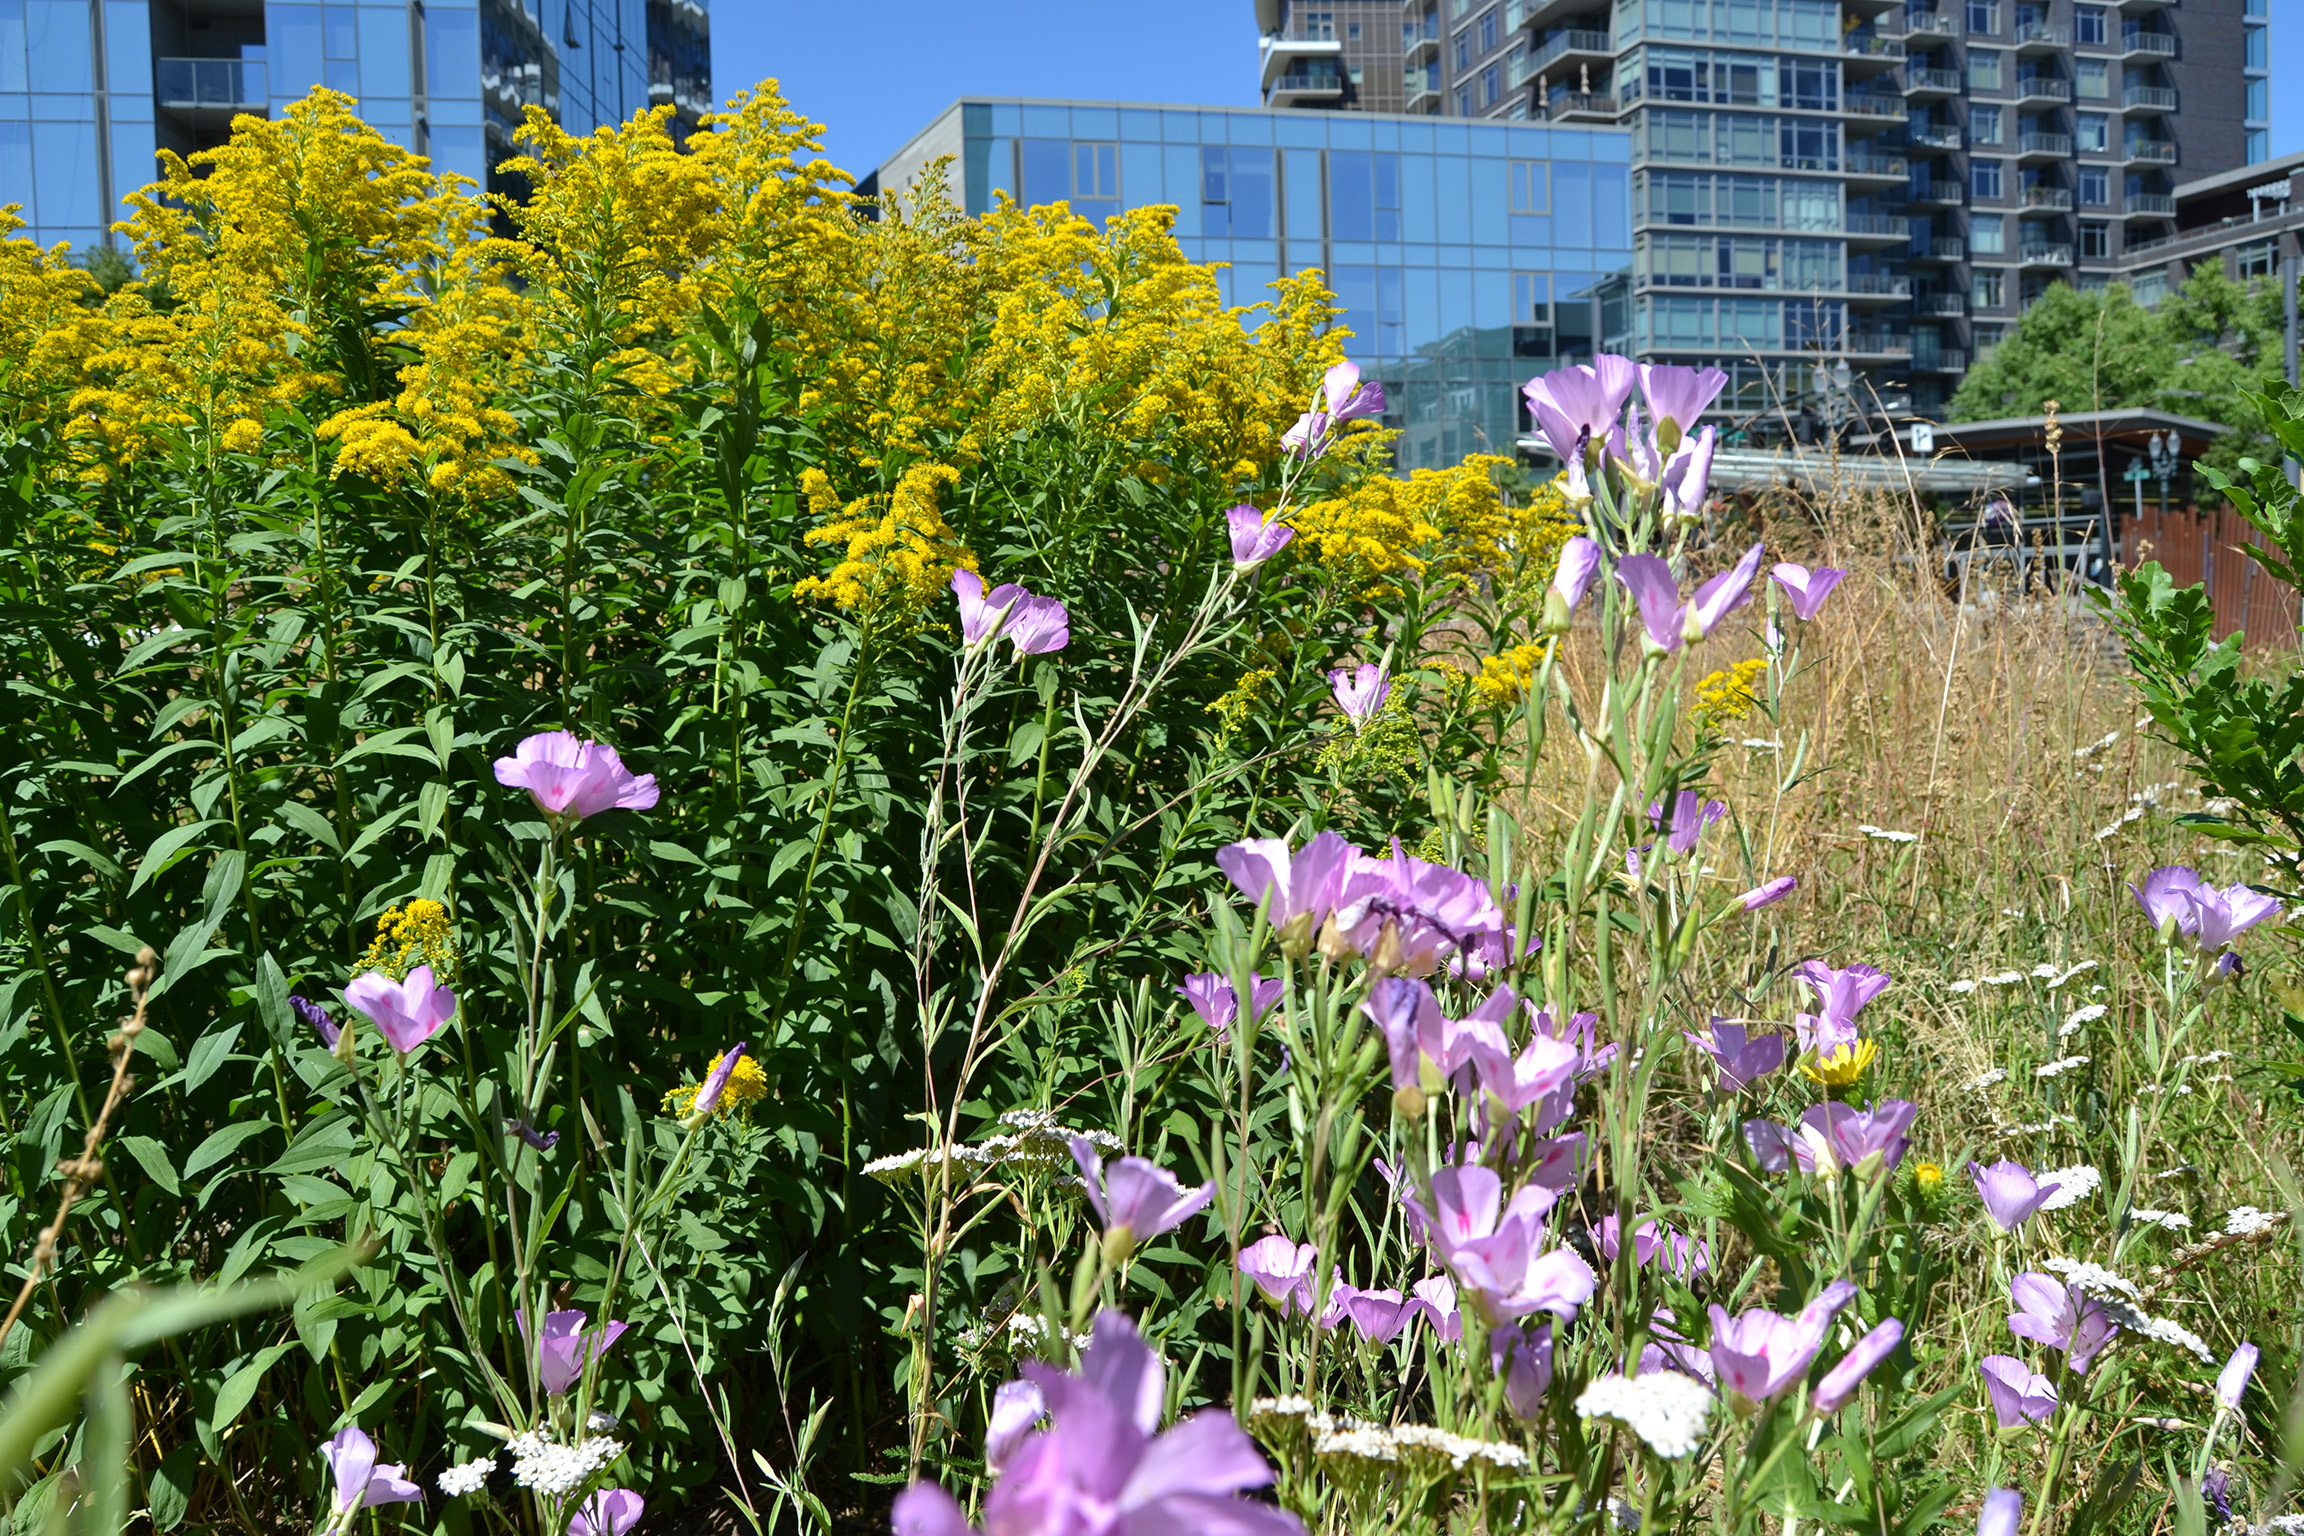 Yellow and pink wildflowers contrast the mirror-like glass of the surrounding office buildings in this nature park in the city